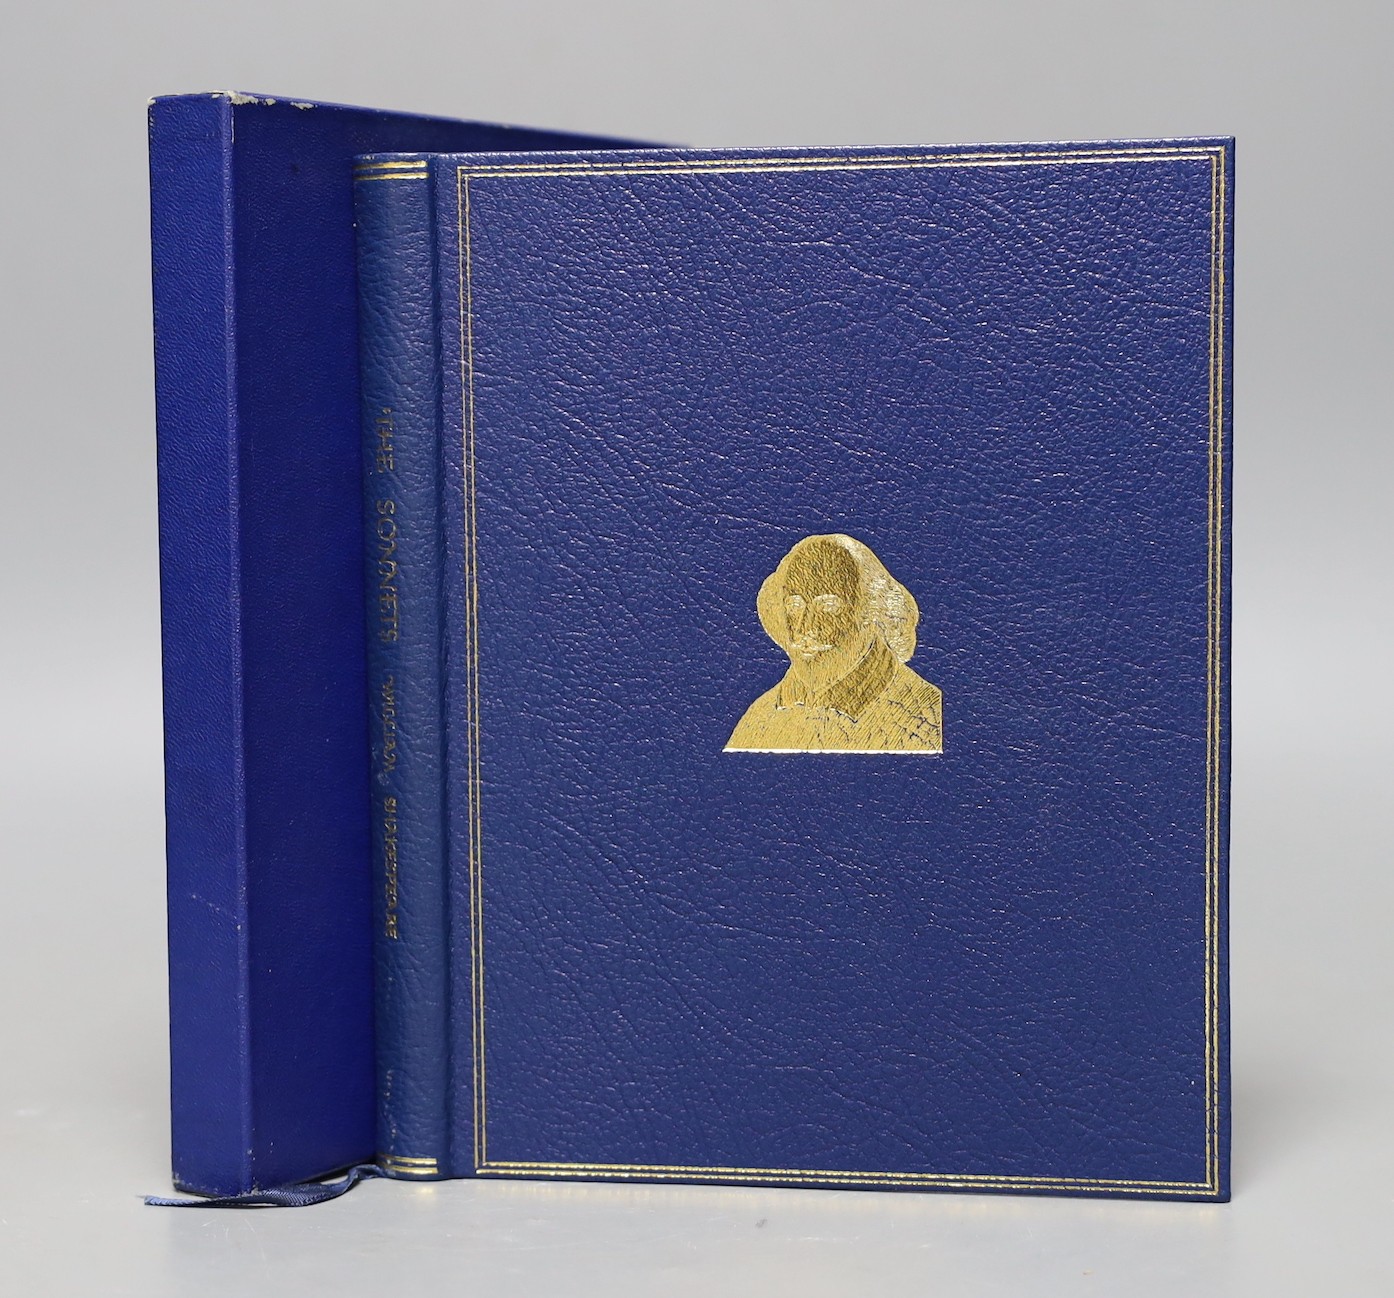 Shakespeare, William - The Royal Shakespeare Theatre Edition of The Sonnets of William Shakespeare, blue morocco gilt, biro inscription to front fly leaf, Shepheard-Welwyn, London, 1975, in slip case, together with a let